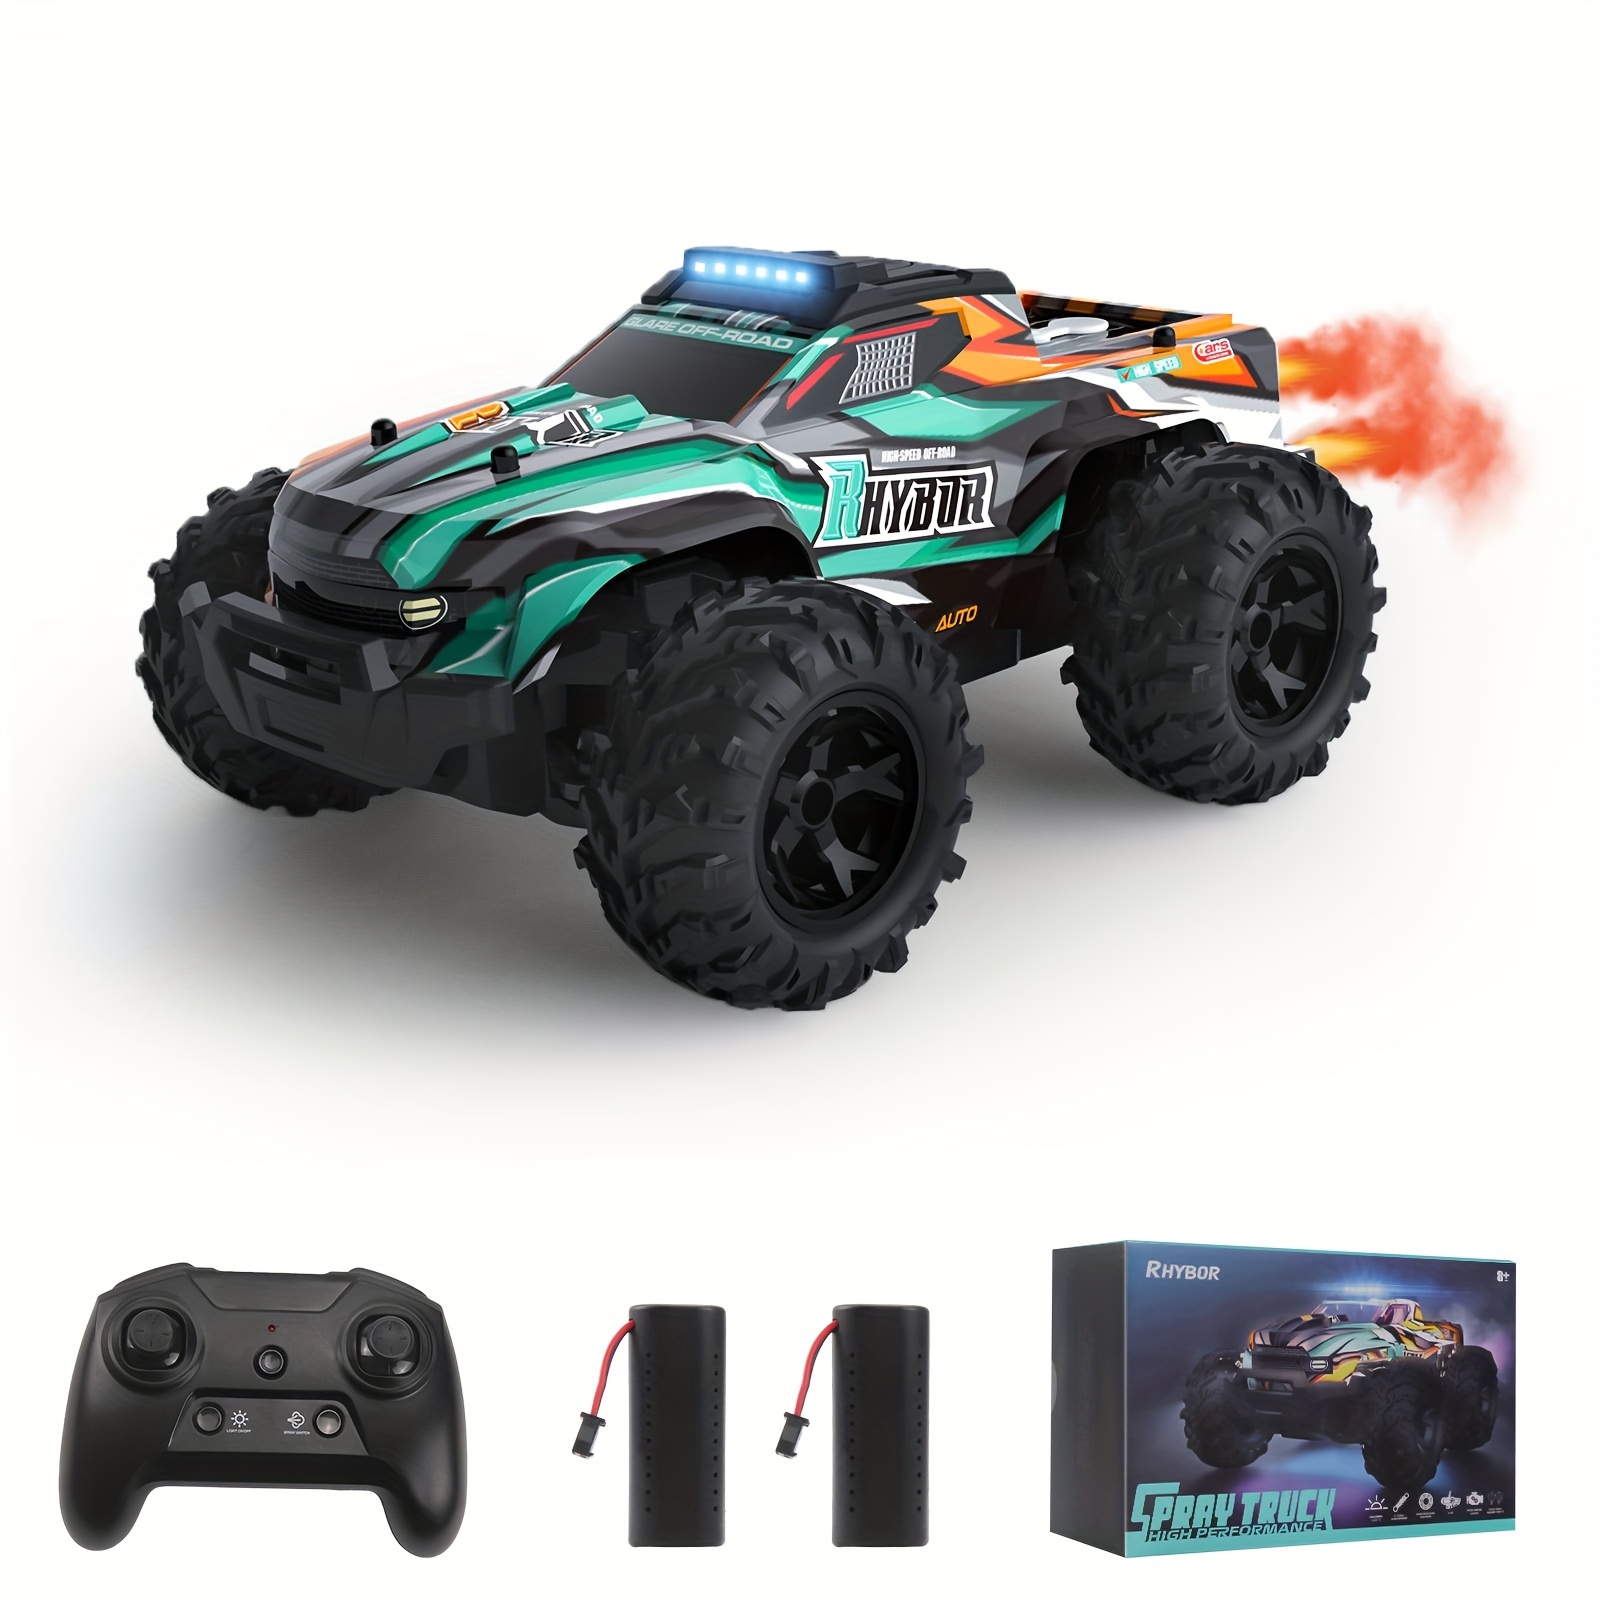 

Remote Control Cars With Rgb Light, 2.4ghz All Terrain Remote Control Monster Truck, 20km/h High Speed Rc Truck, Spray Rc Cars For Boys 8-12 And Girls Adult